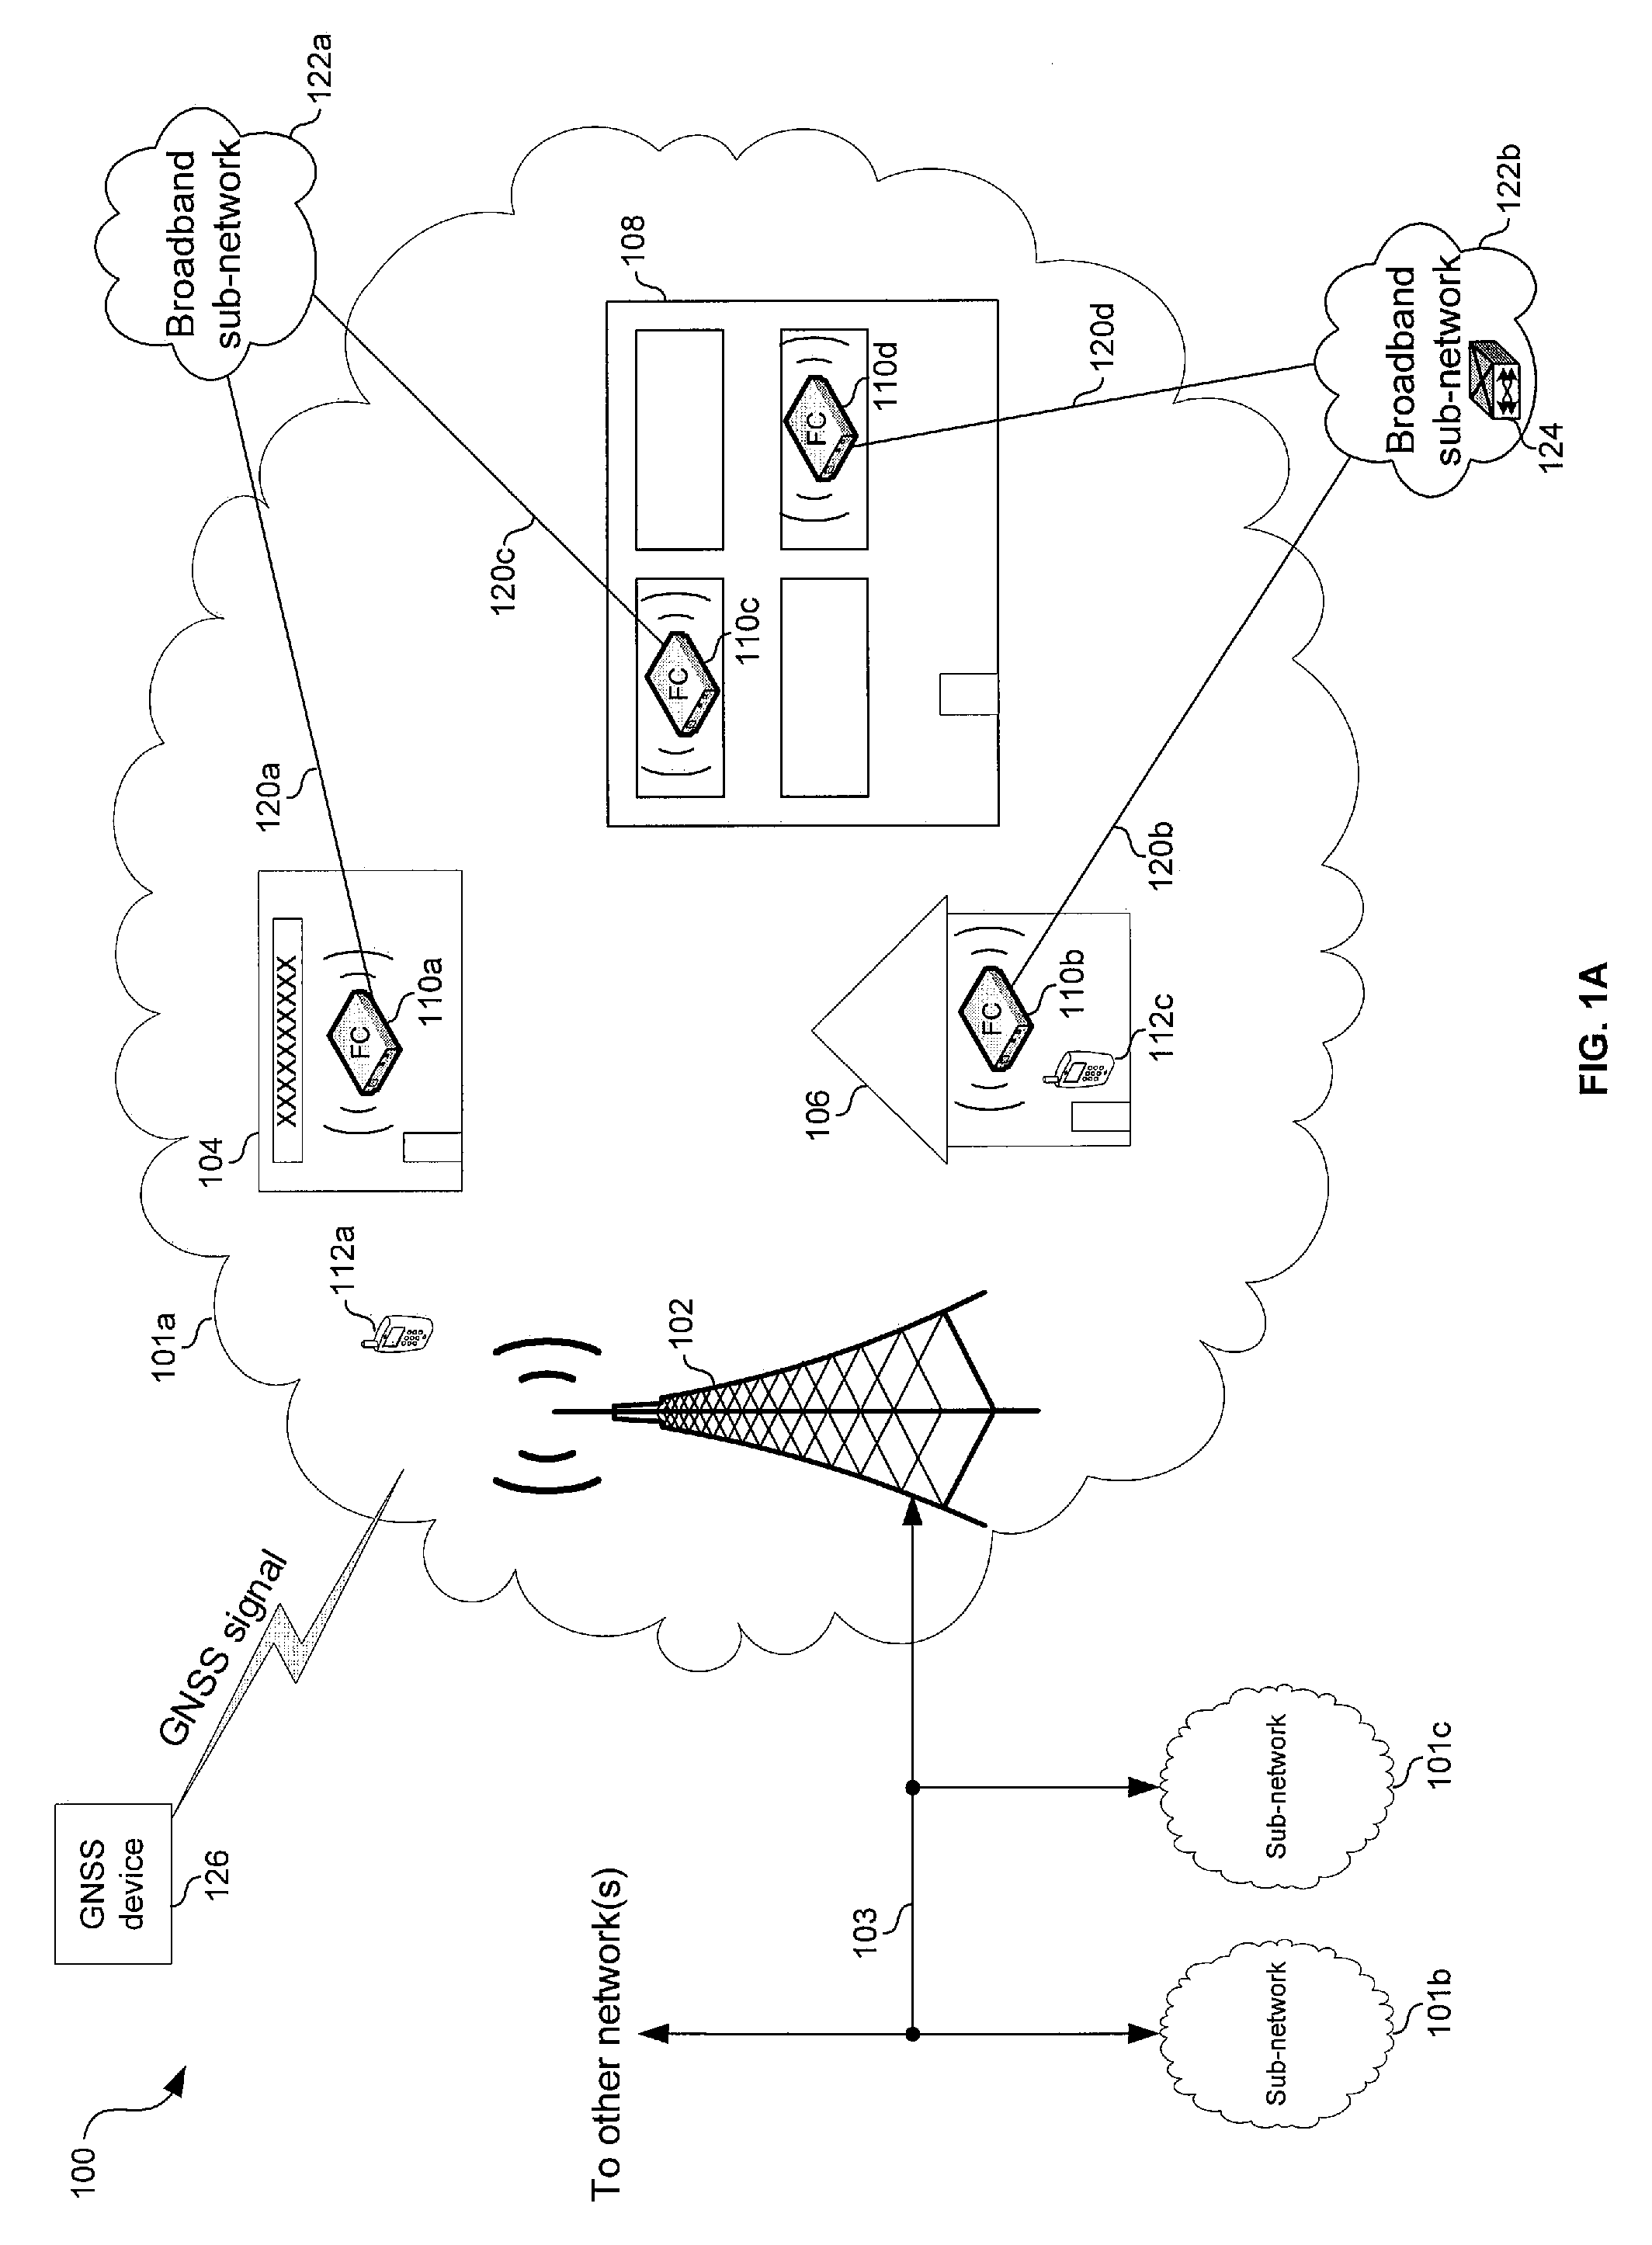 Method and system for network synchronization via a femtocell